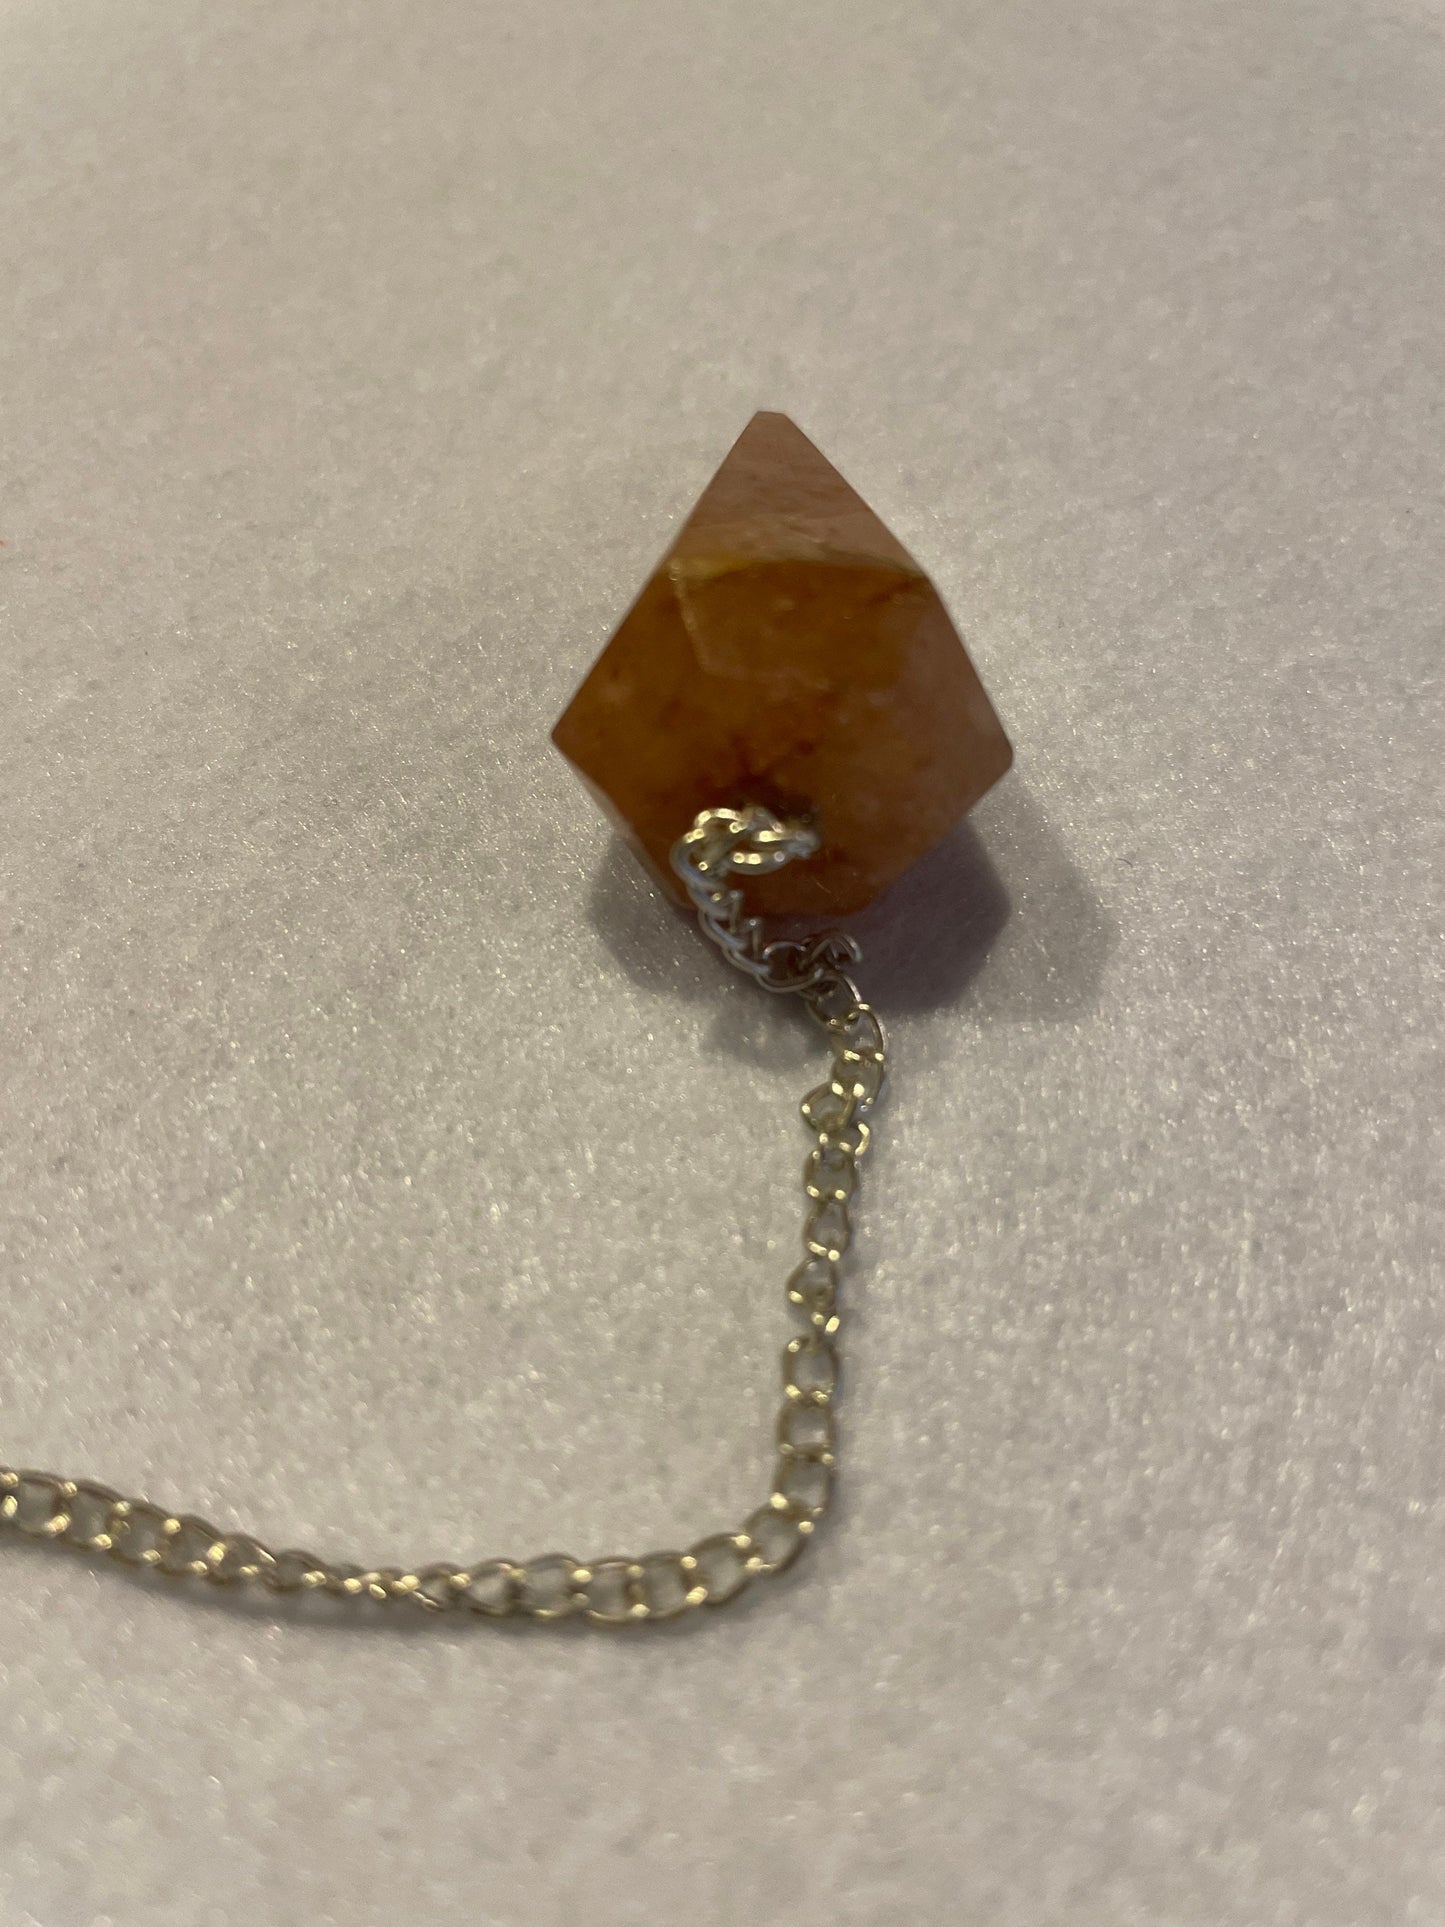 Beautiful Carnelian Pendulum is 1.25” and with the chain it is approximately 9.5”